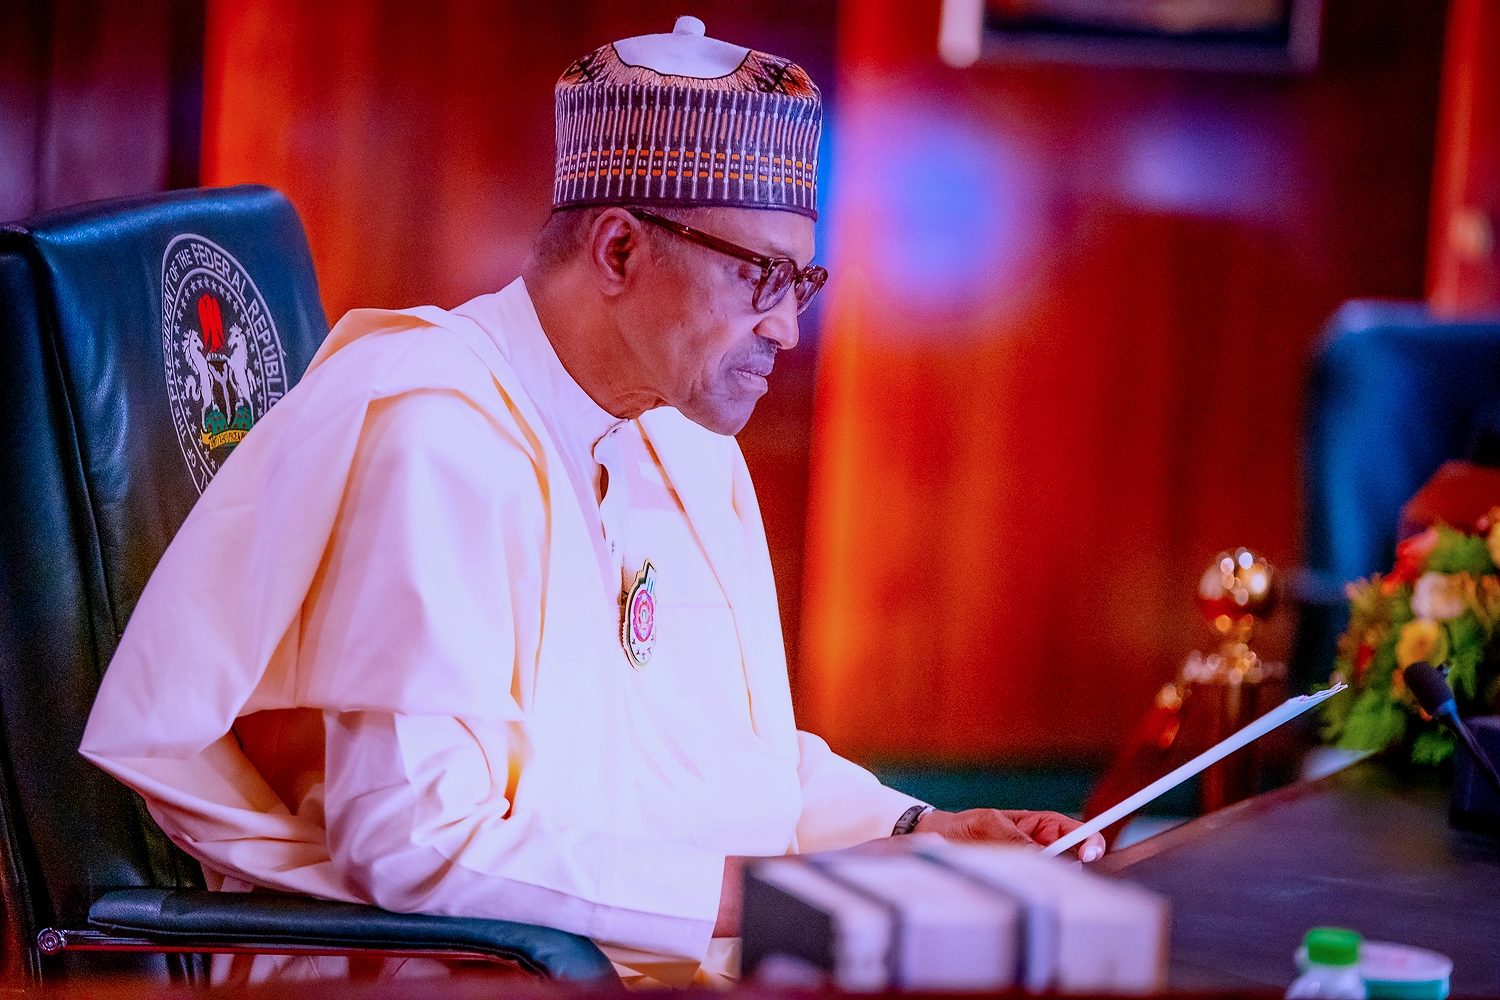 President Buhari Inaugurates Six Projects Ahead of Transition to New Administration